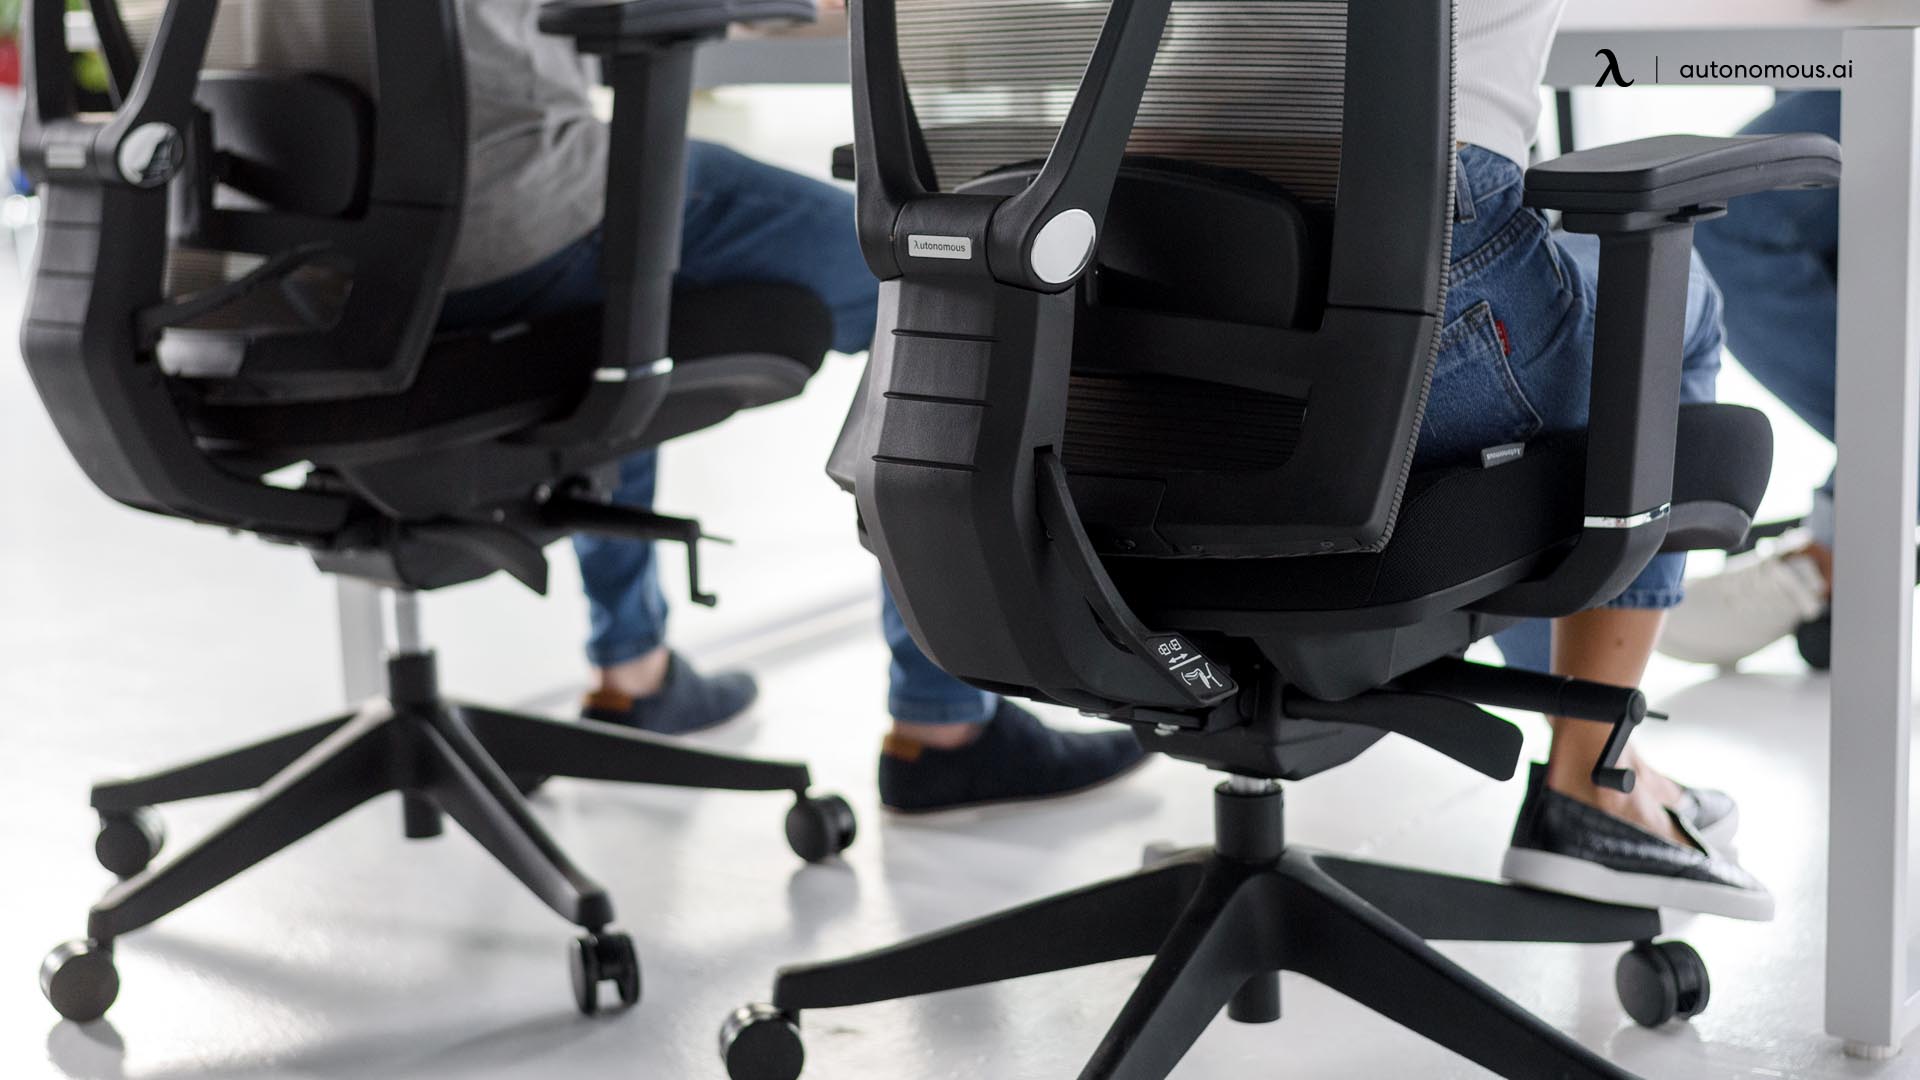 Chairs with adjustable back support